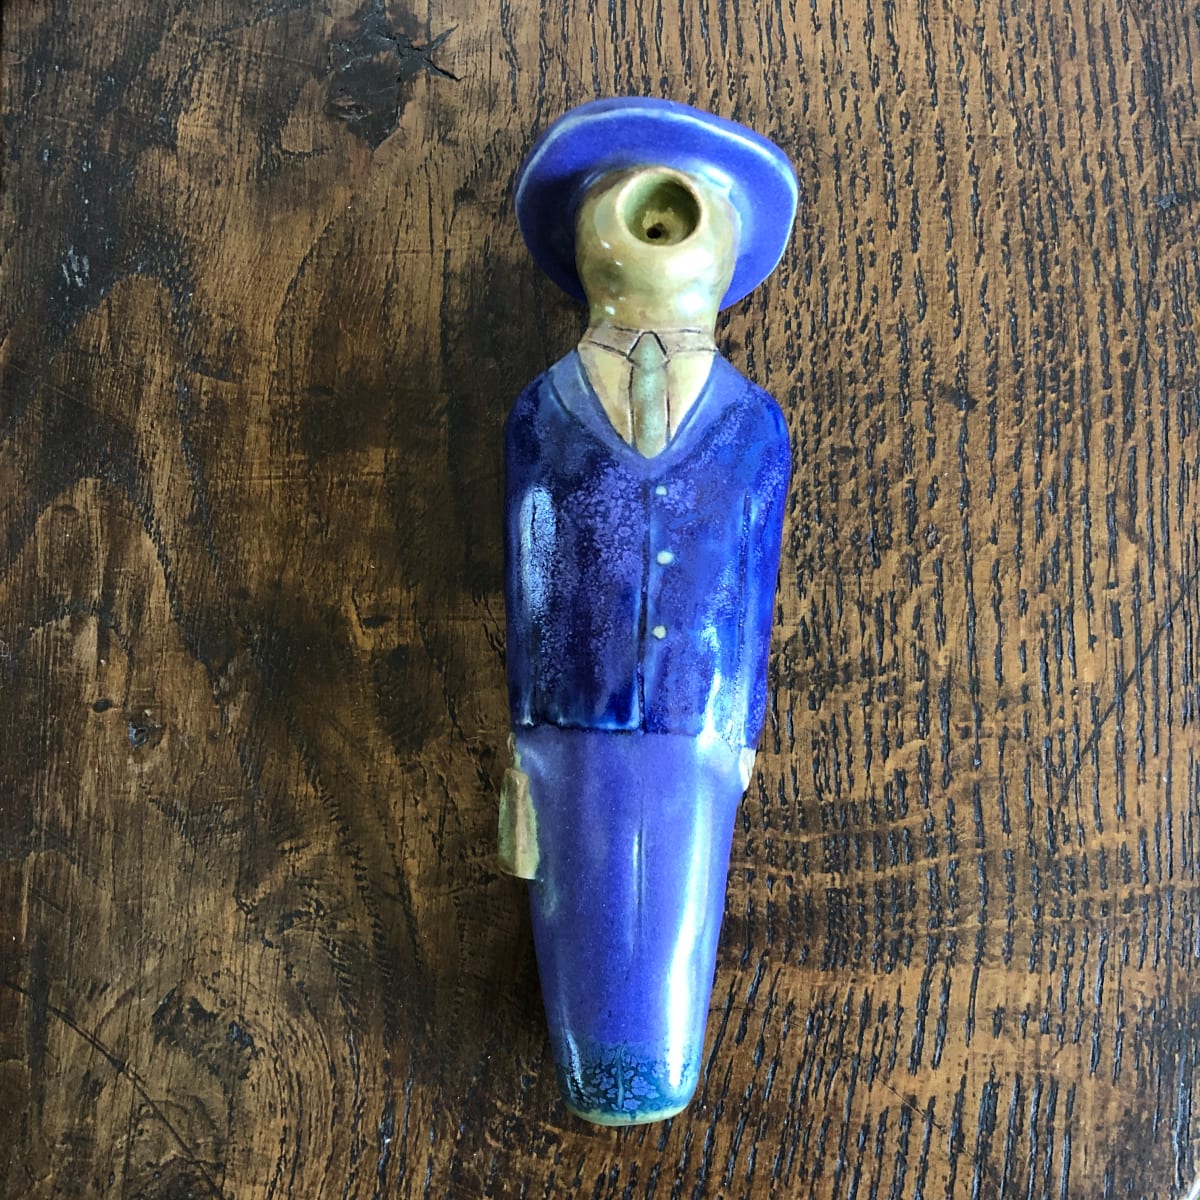 The Man Pipe, in purple and blue. by Nell Eakin 